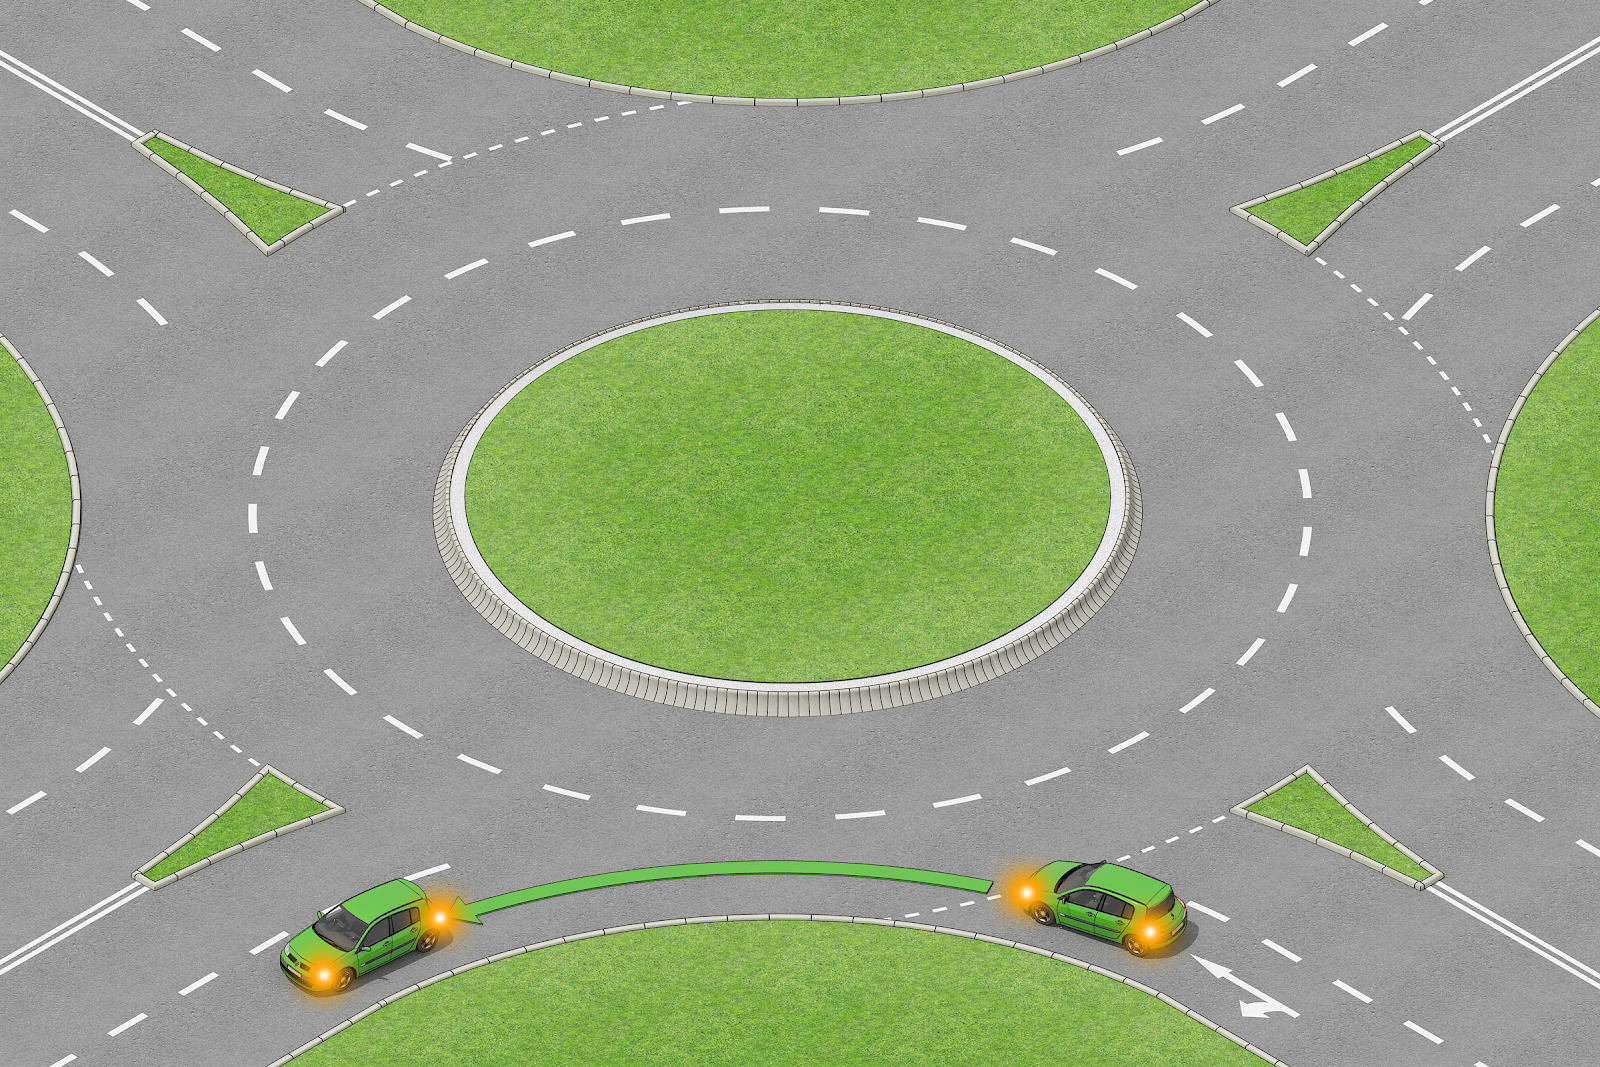 HOW TO USE THE FIRST EXIT AT A ROUNDABOUT TO TURN LEFT